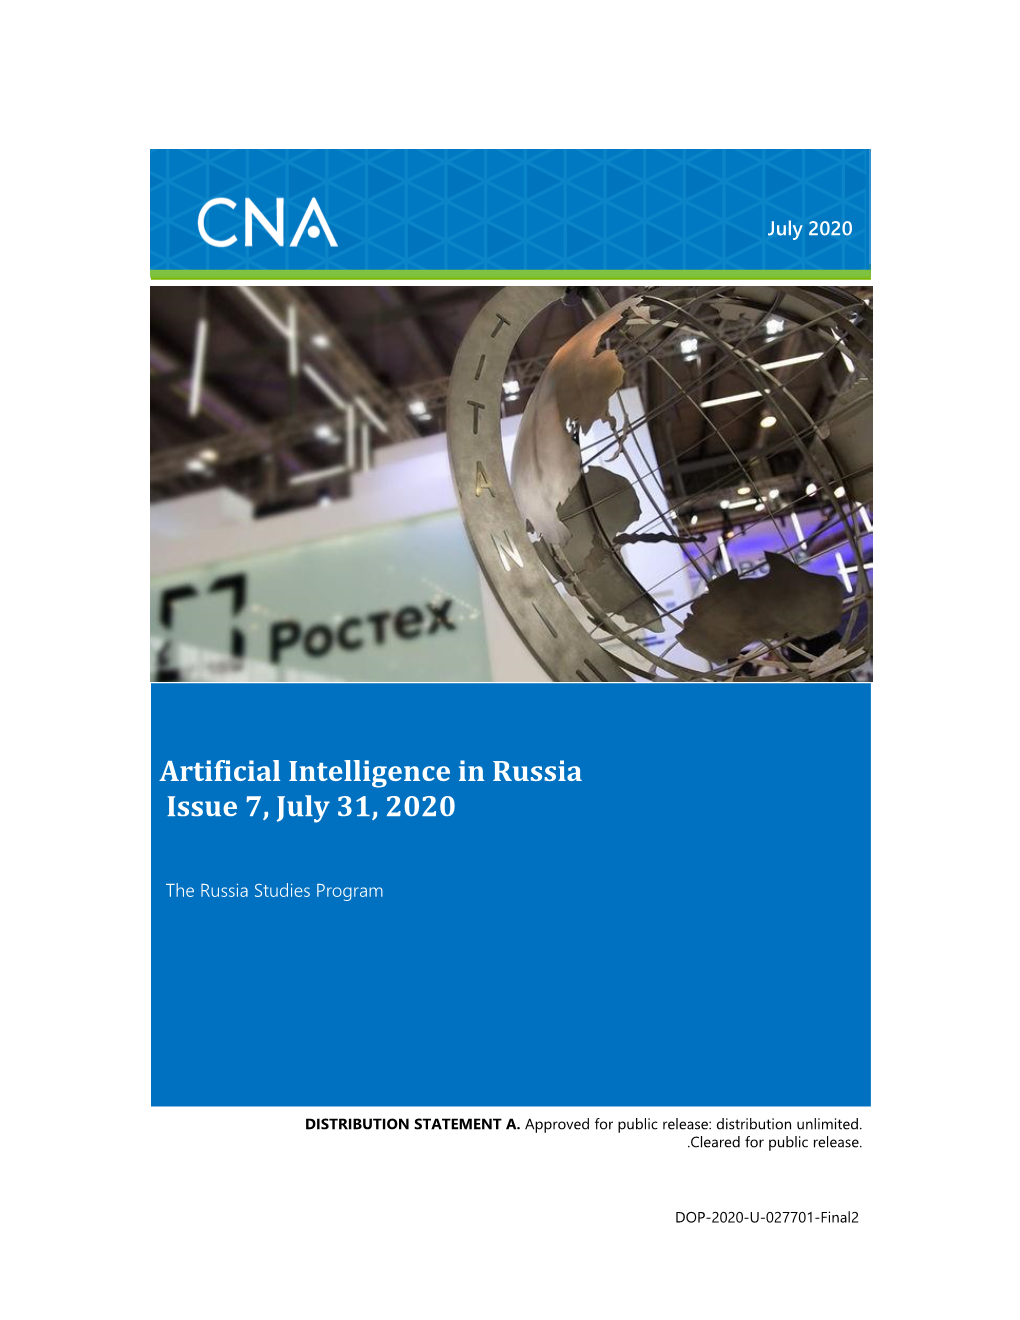 Artificial Intelligence in Russia Issue 7, July 31, 2020